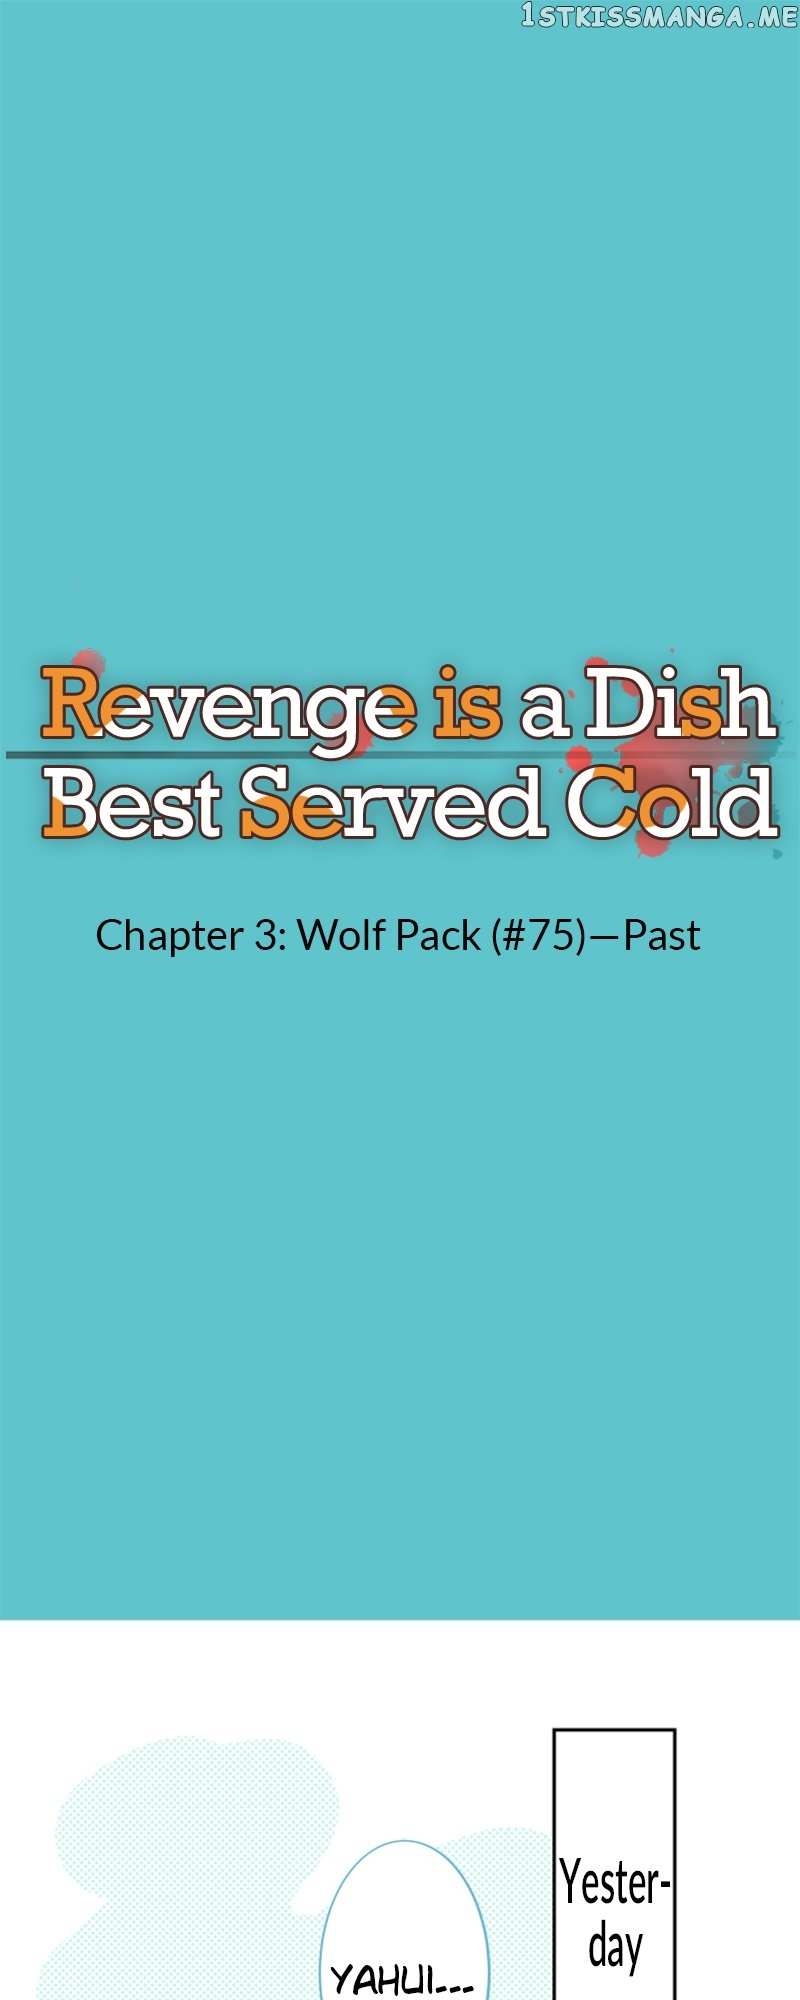 Revenge Is A Dish Best Served Cold - Page 2